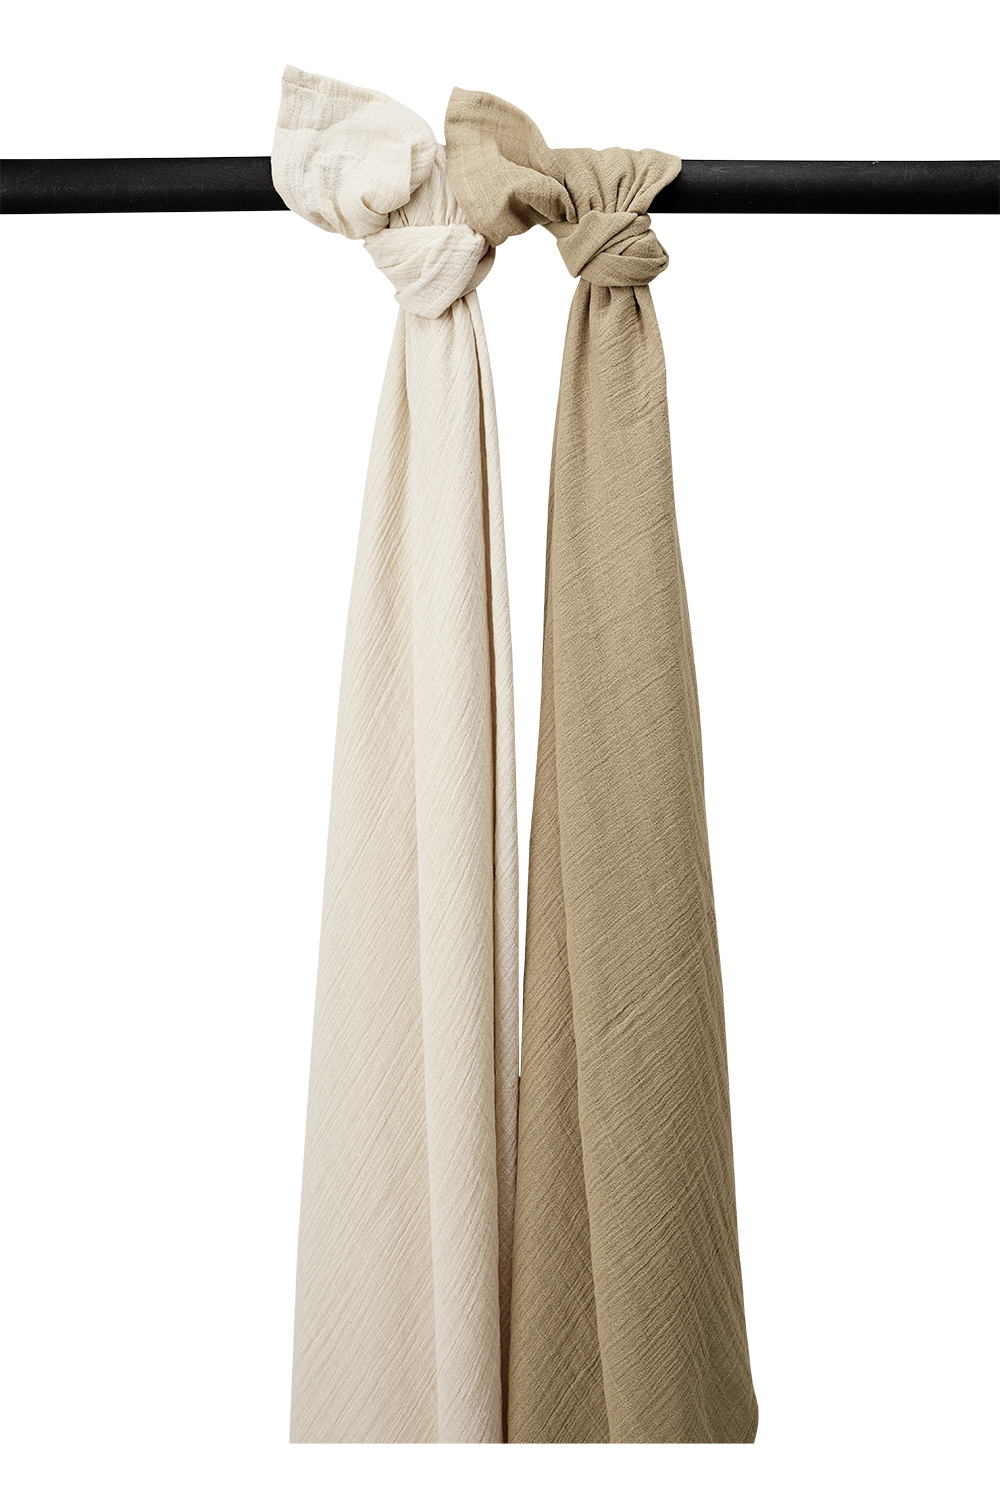 Swaddle 2-pack pre-washed muslin Uni - soft sand/taupe - 120x120cm